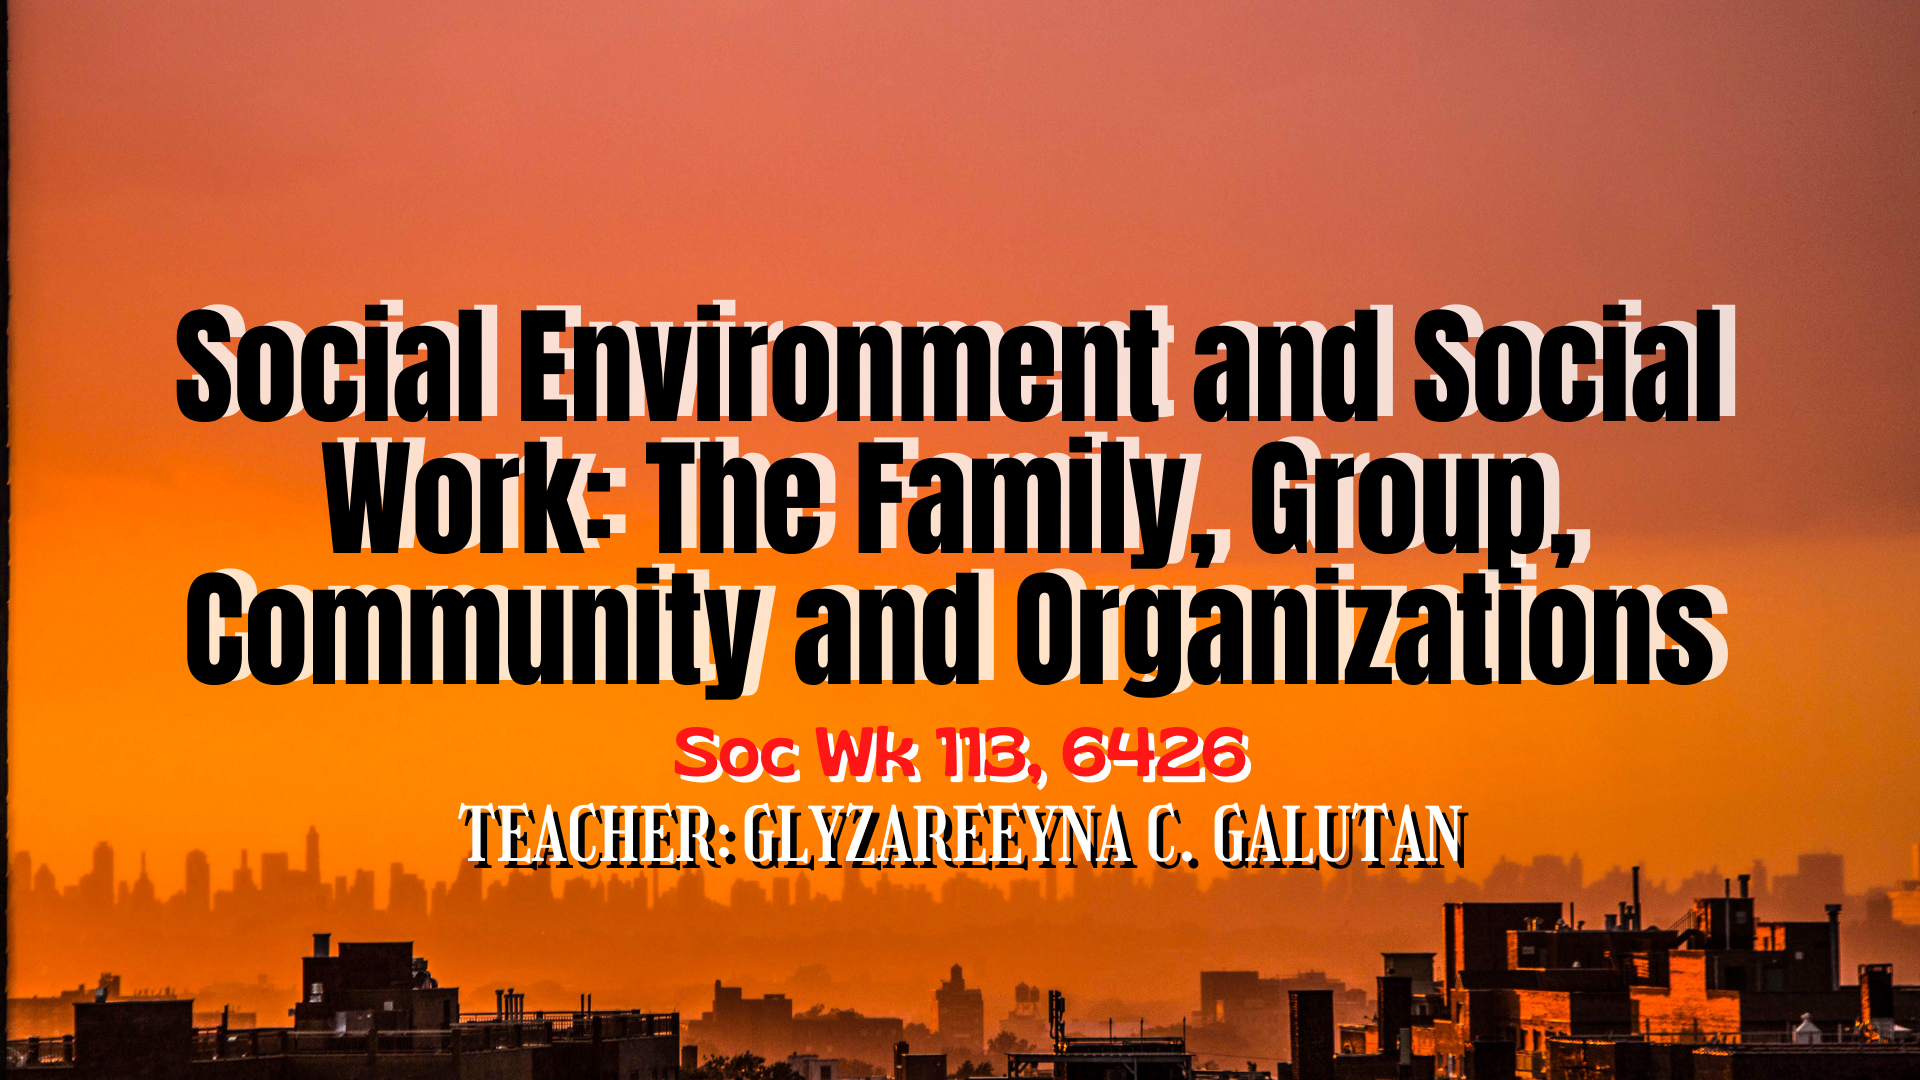 Social Environment and Social Work: The Family, Group, Community and Organizations